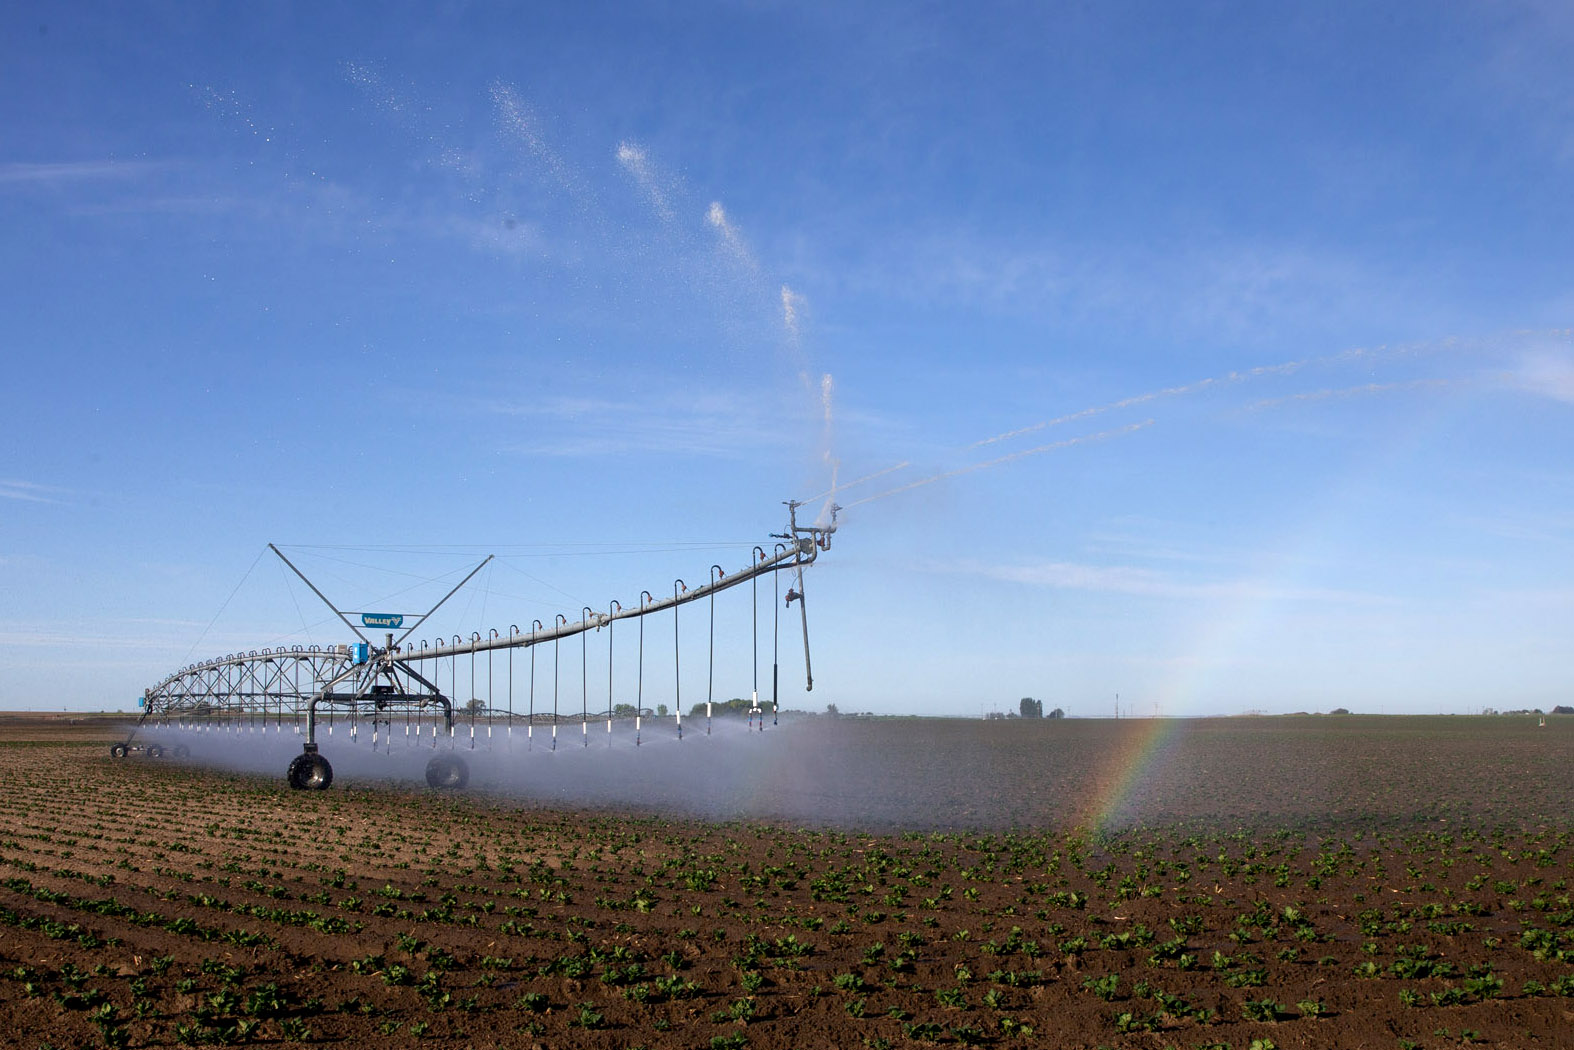 A rainbow forms under sprinklers on a field of potatoes in Pasco, Washington on May 1, 2020. A billion pounds of excess potatoes in Washington state, second largest potato producer in the country. About 70 percent of its crop usually goes to overseas, to Pacific Rim countries primarily, in the form of french fries, but with so many restaurants/food service closed in U.S. and internationally, they have way more potatoes than they can sell. Last year they didn’t have enough to meet demand; now growers are facing the prospect of losing it all. (photo by Karen Ducey)